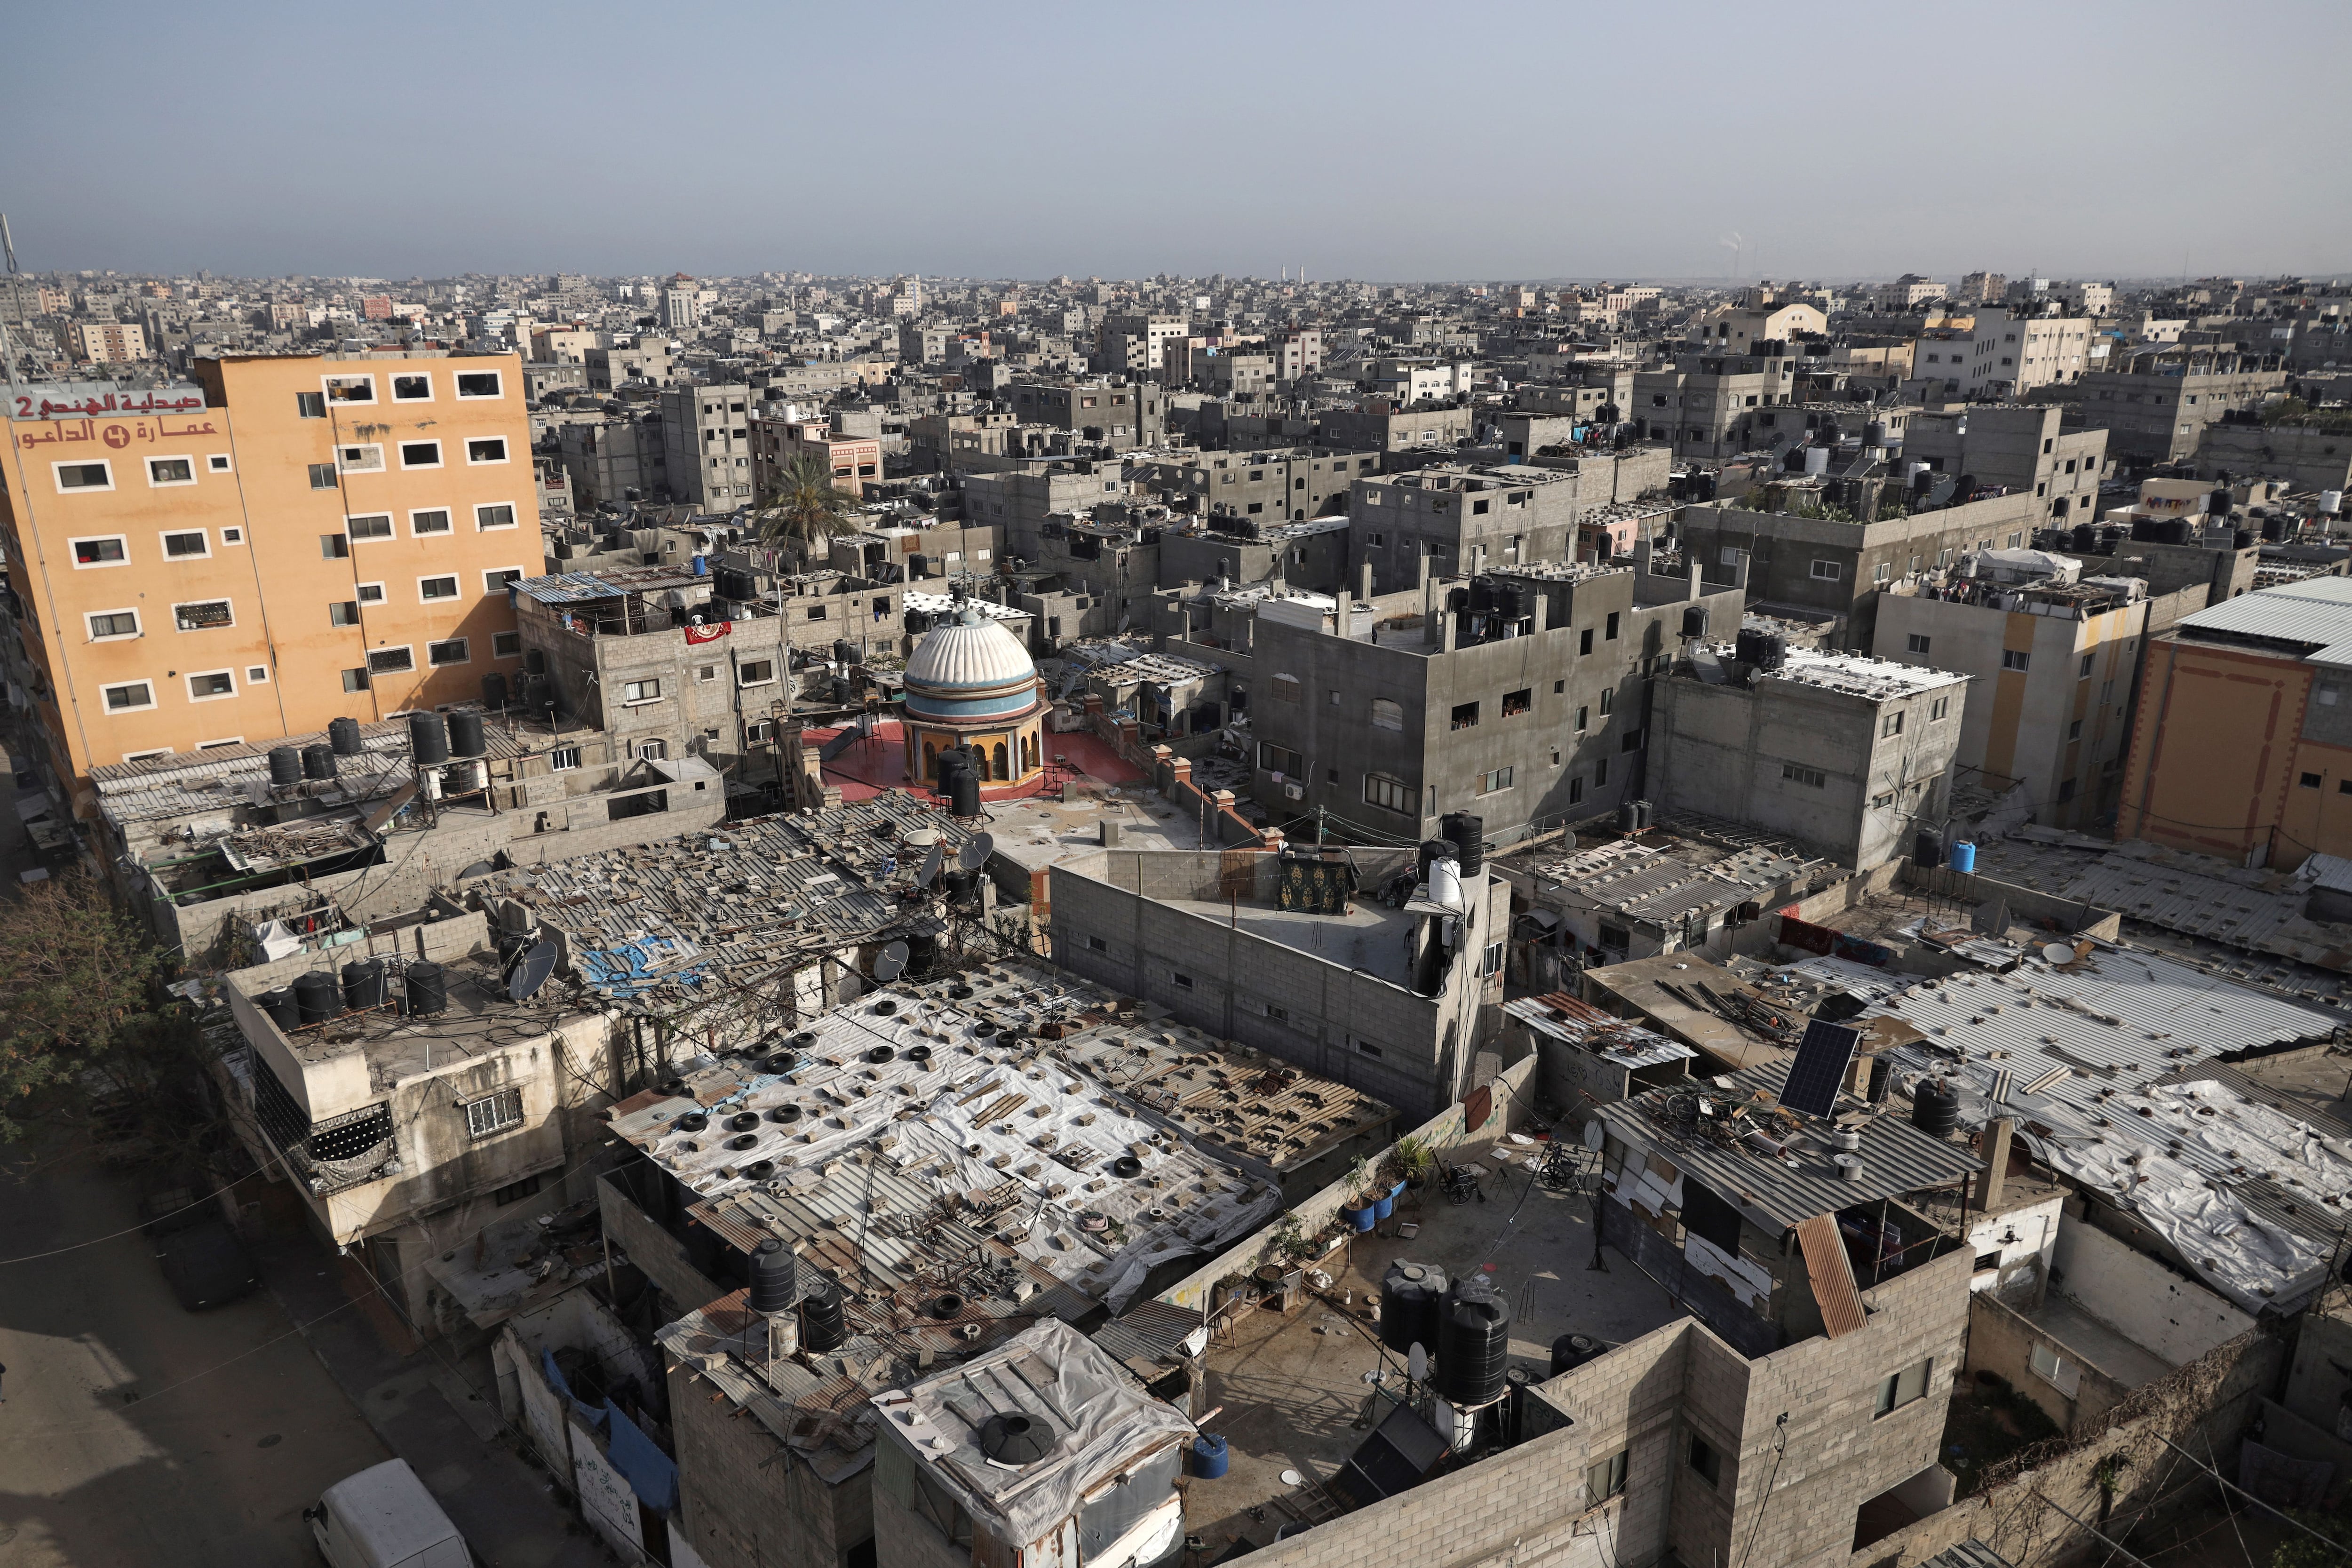 An image shows Palestinian houses and buildings in the Jabalia refugee camp, north of the Gaza Strip, on April 8, 2021. (MOHAMMED ABED/AFP).